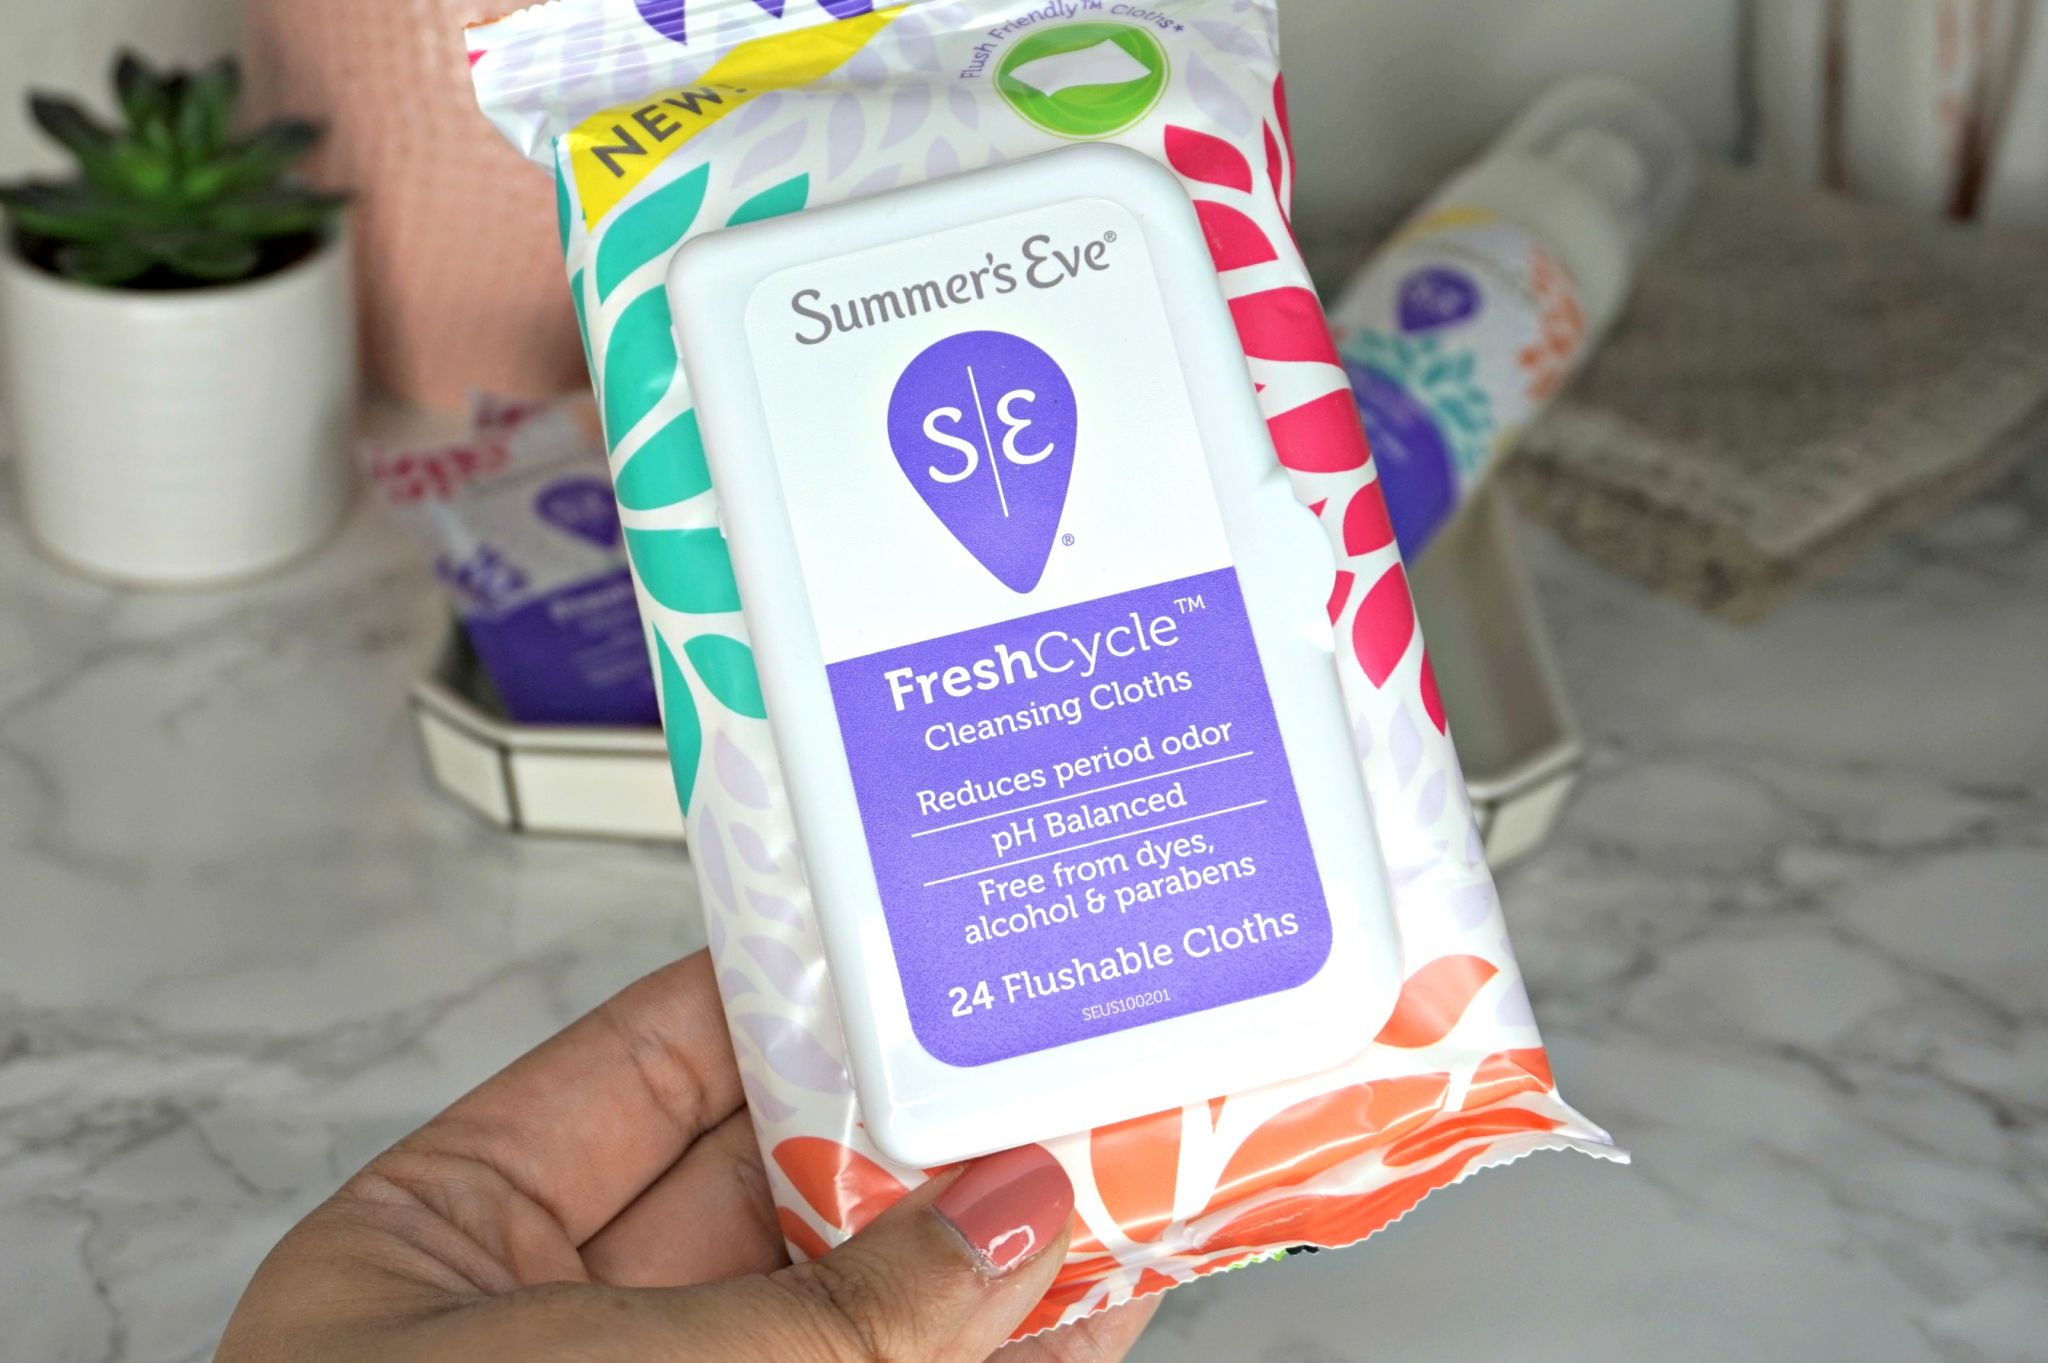 Simple Ways To Boost Your Self-Confidence During Your Period // How to Boost Your Self-Confidence // Self-Care During Your Period | Beauty With Lily #ad #FreshCycle #SEFreshAF #SummersEve